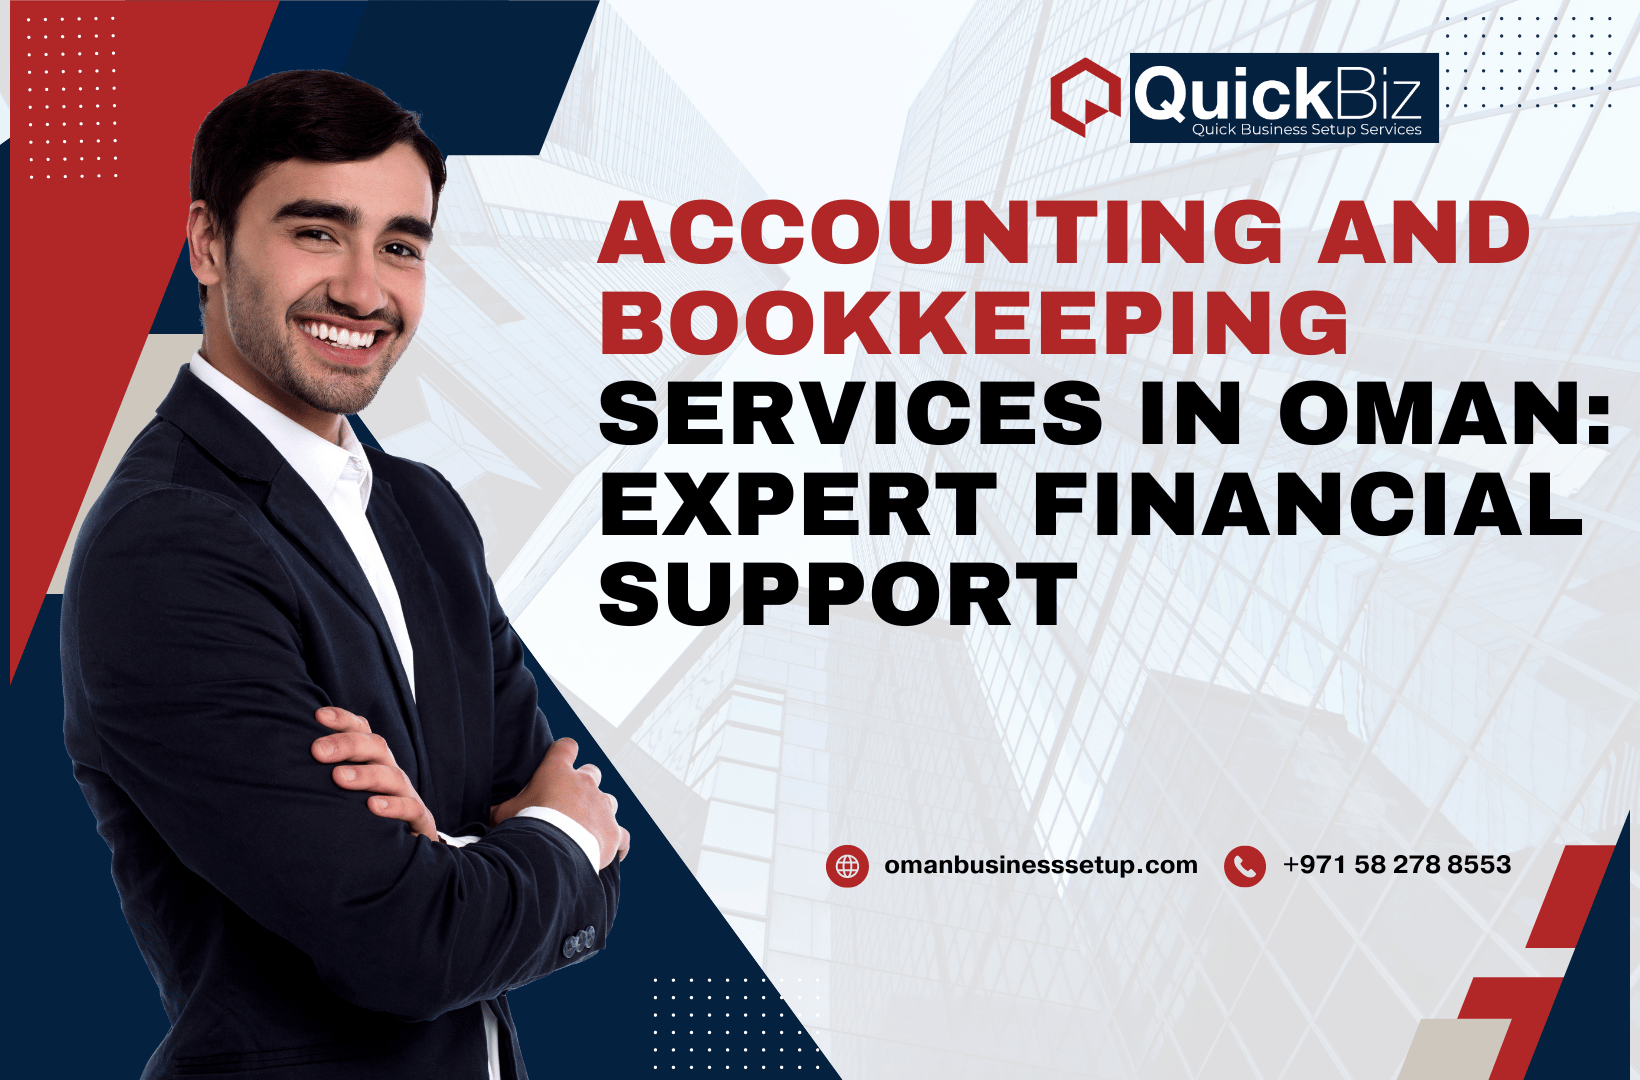 Accounting and Bookkeeping Services in Oman Expert Financial Support